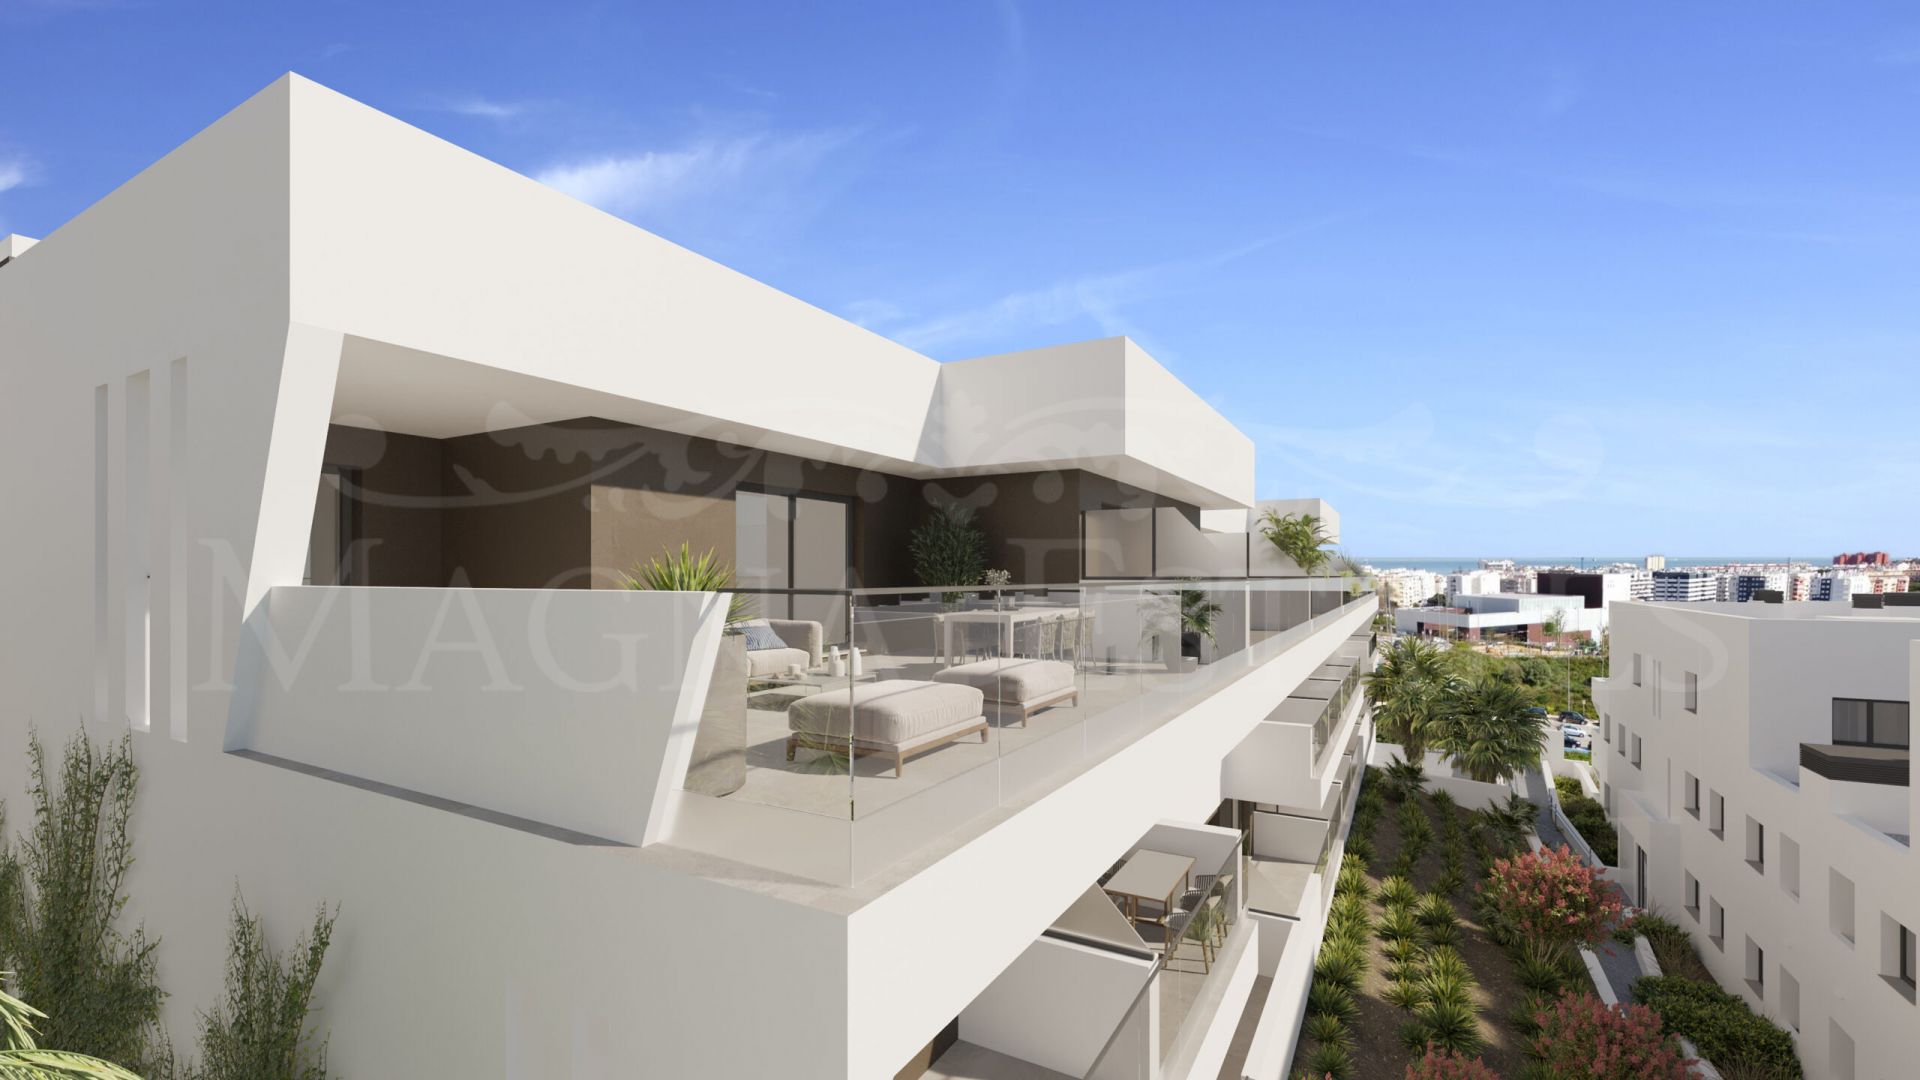 3 bedroom apartment in Estepona at an exceptional price.